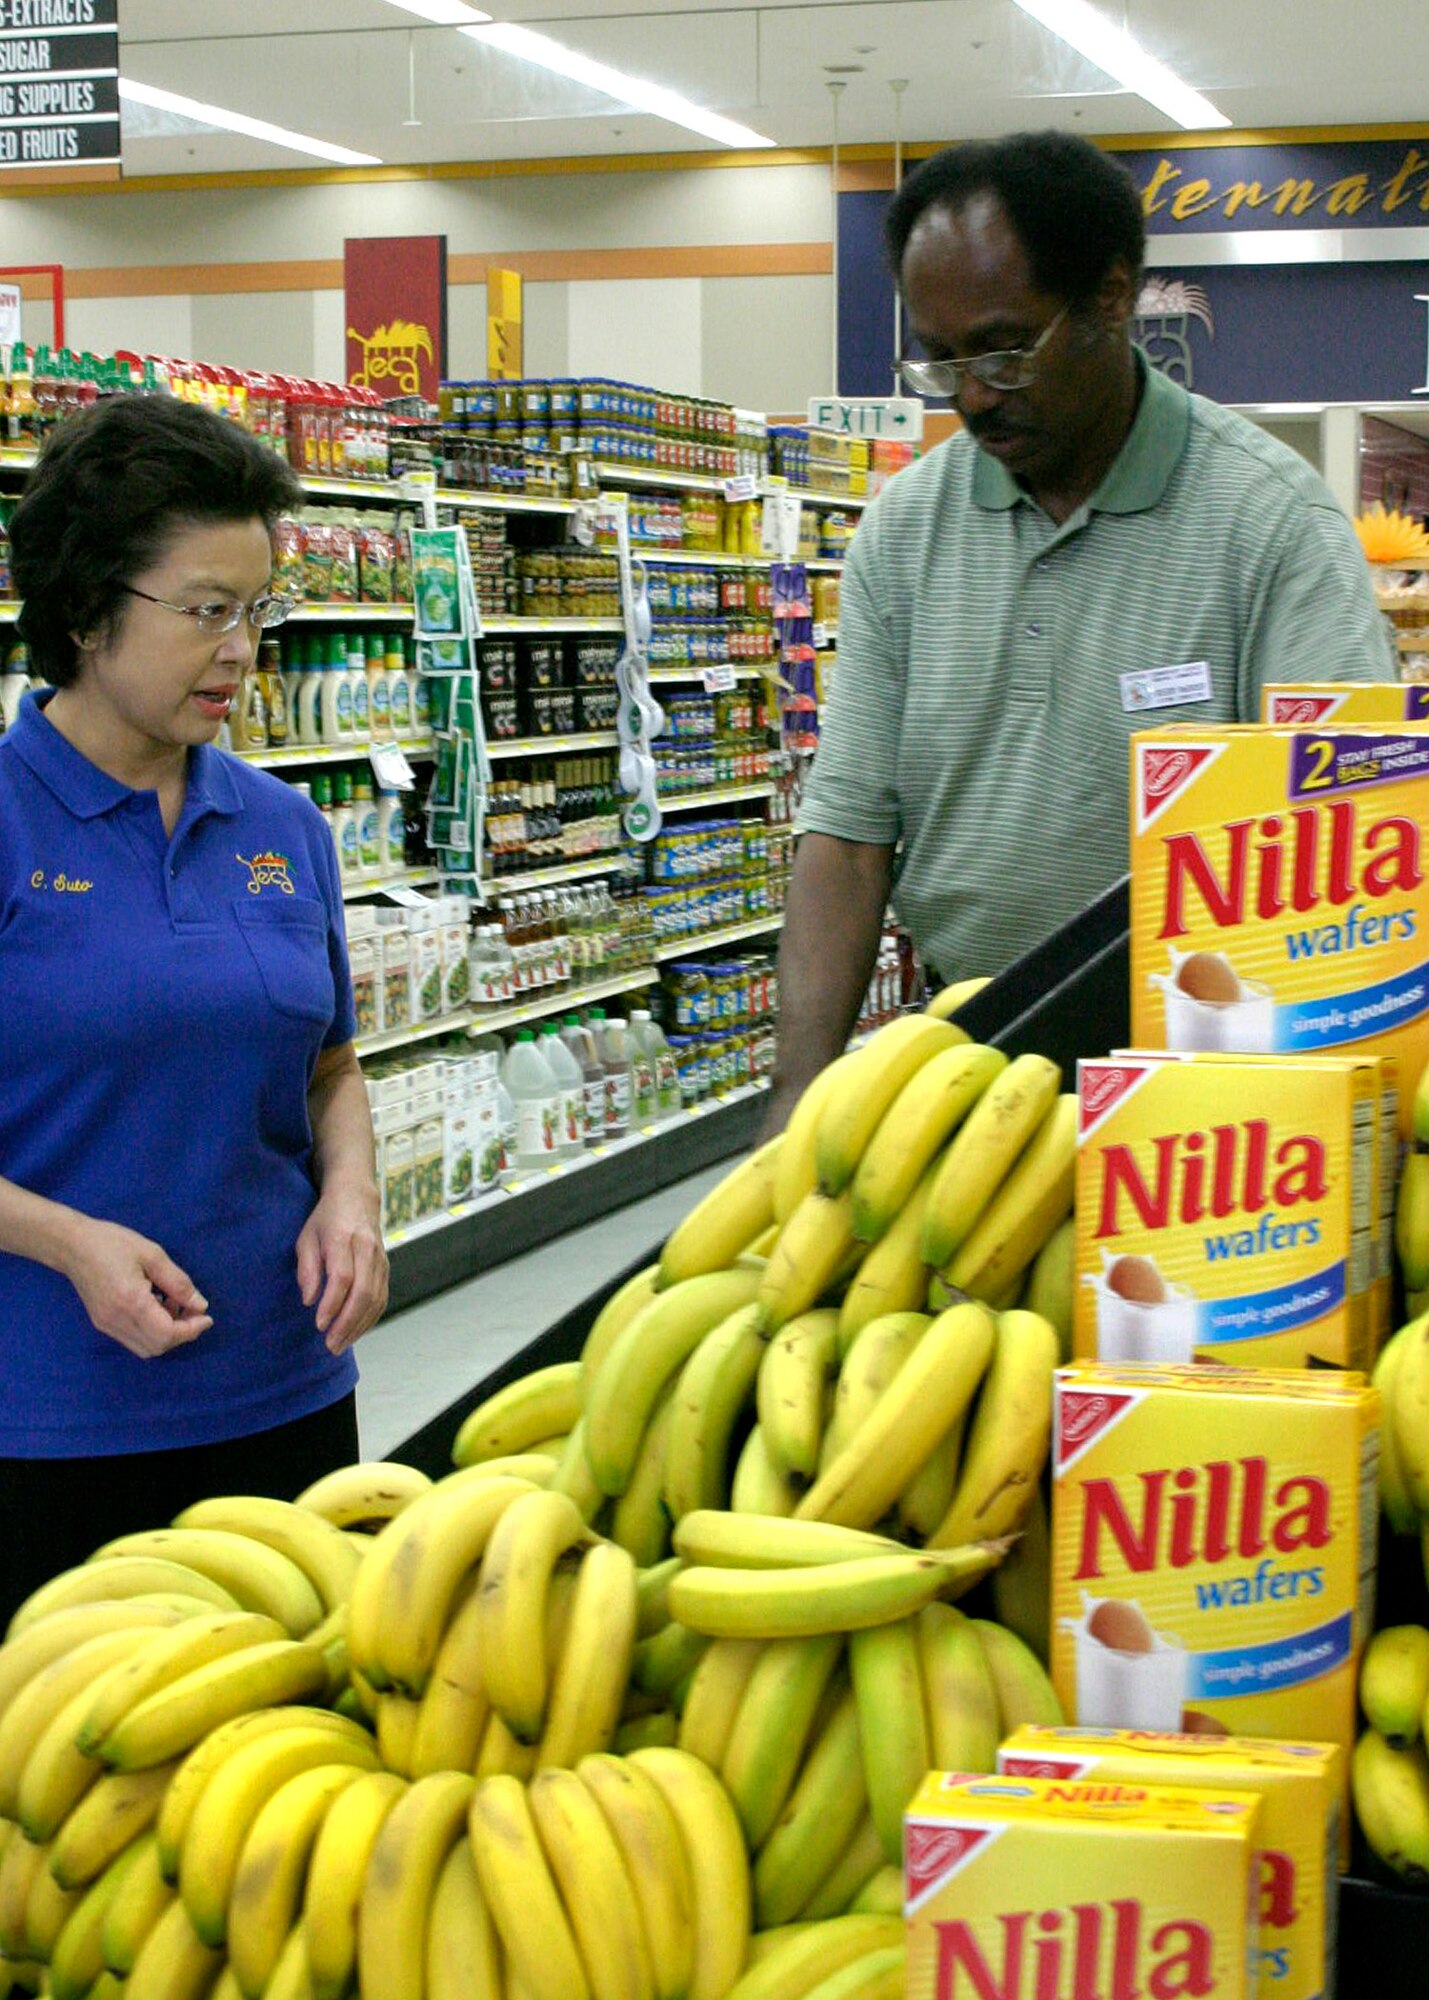 MISAWA AIR BASE, Japan -- Suto Chiyuki, commissary produce department superintendent, and Greg McGruder, commissary manager, check displays at the commissary designed to catch shopper's eyes as they walk in Sept. 4, 2008. Mr. McGruder and his team are finding new ways of improving the quality and price of the produce sold at the commissary. (U.S. Air Force photo by Staff Sgt. Araceli Alarcon)